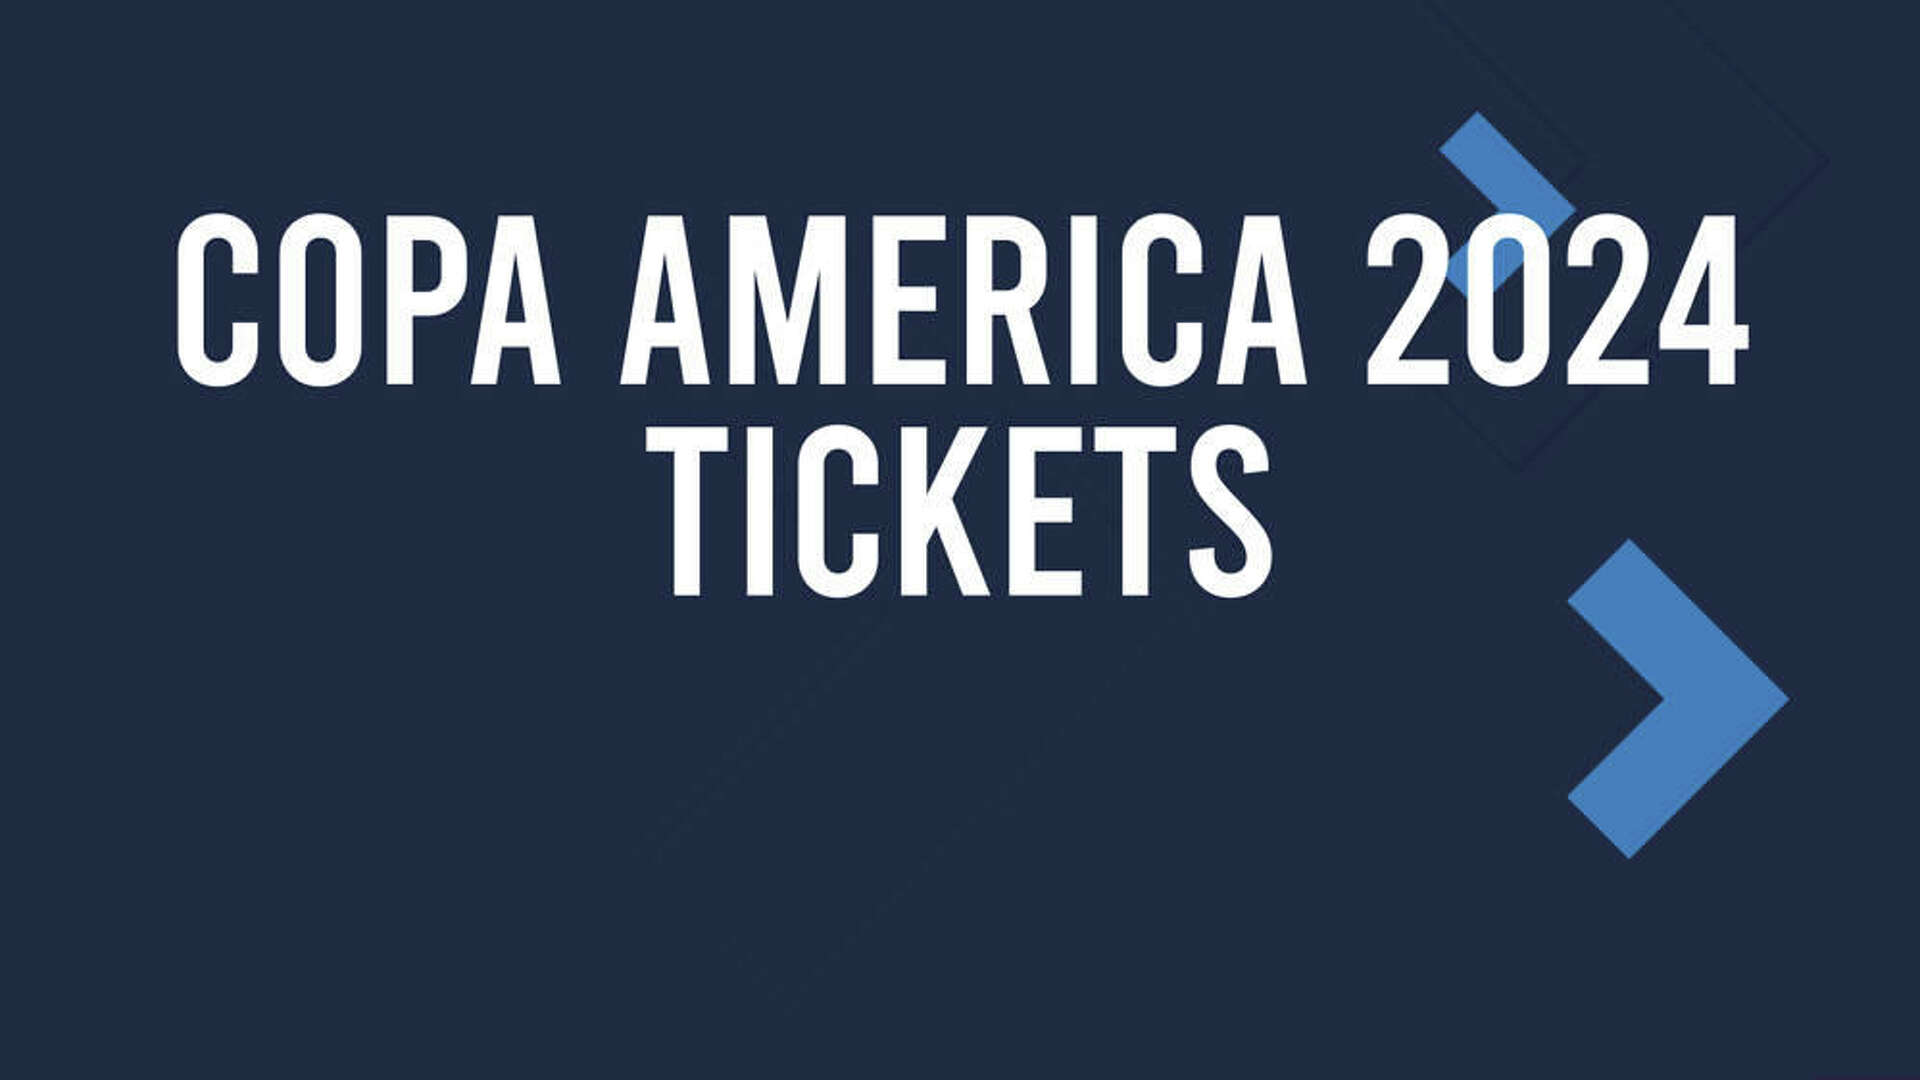 Copa America 2024 Tickets and Schedules